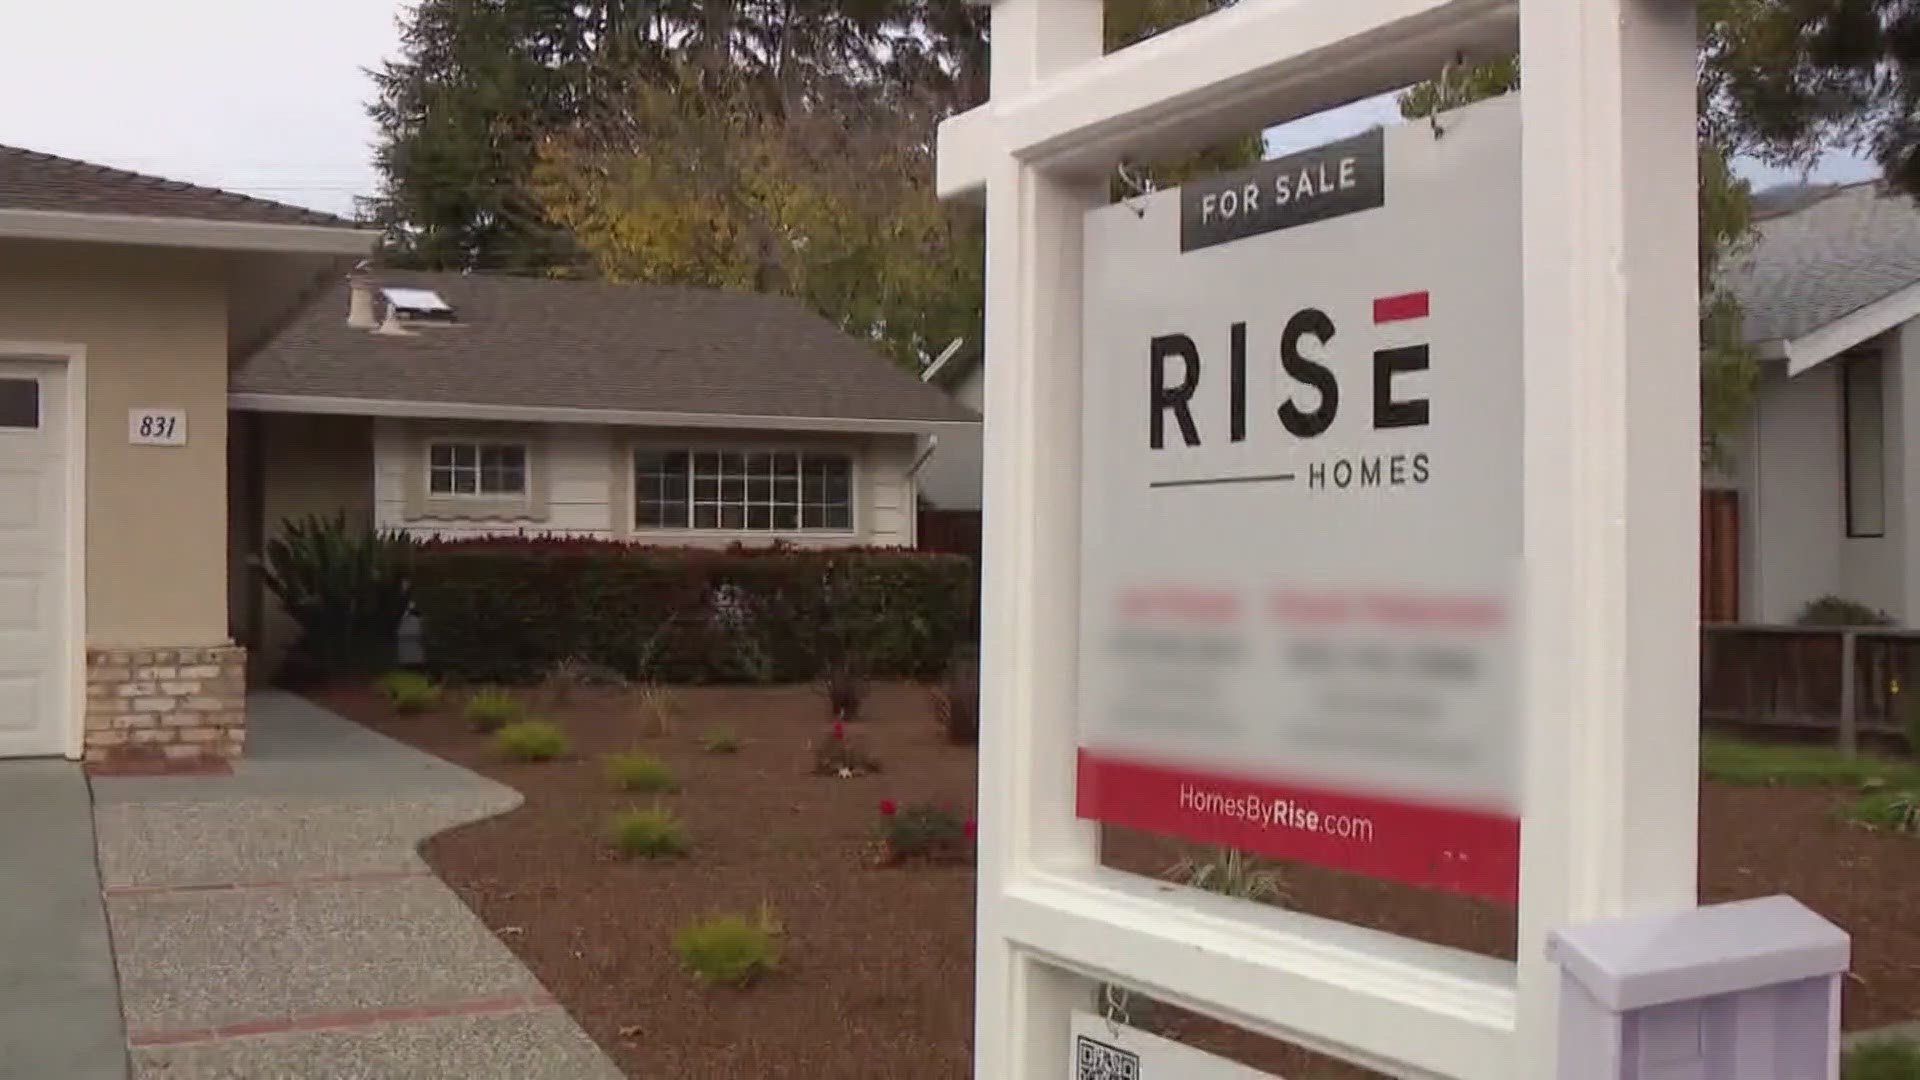 As more homes come on the market in Denver, realtors say they're noticing two very different scenarios play out. Some homes are selling quickly, others not so much.